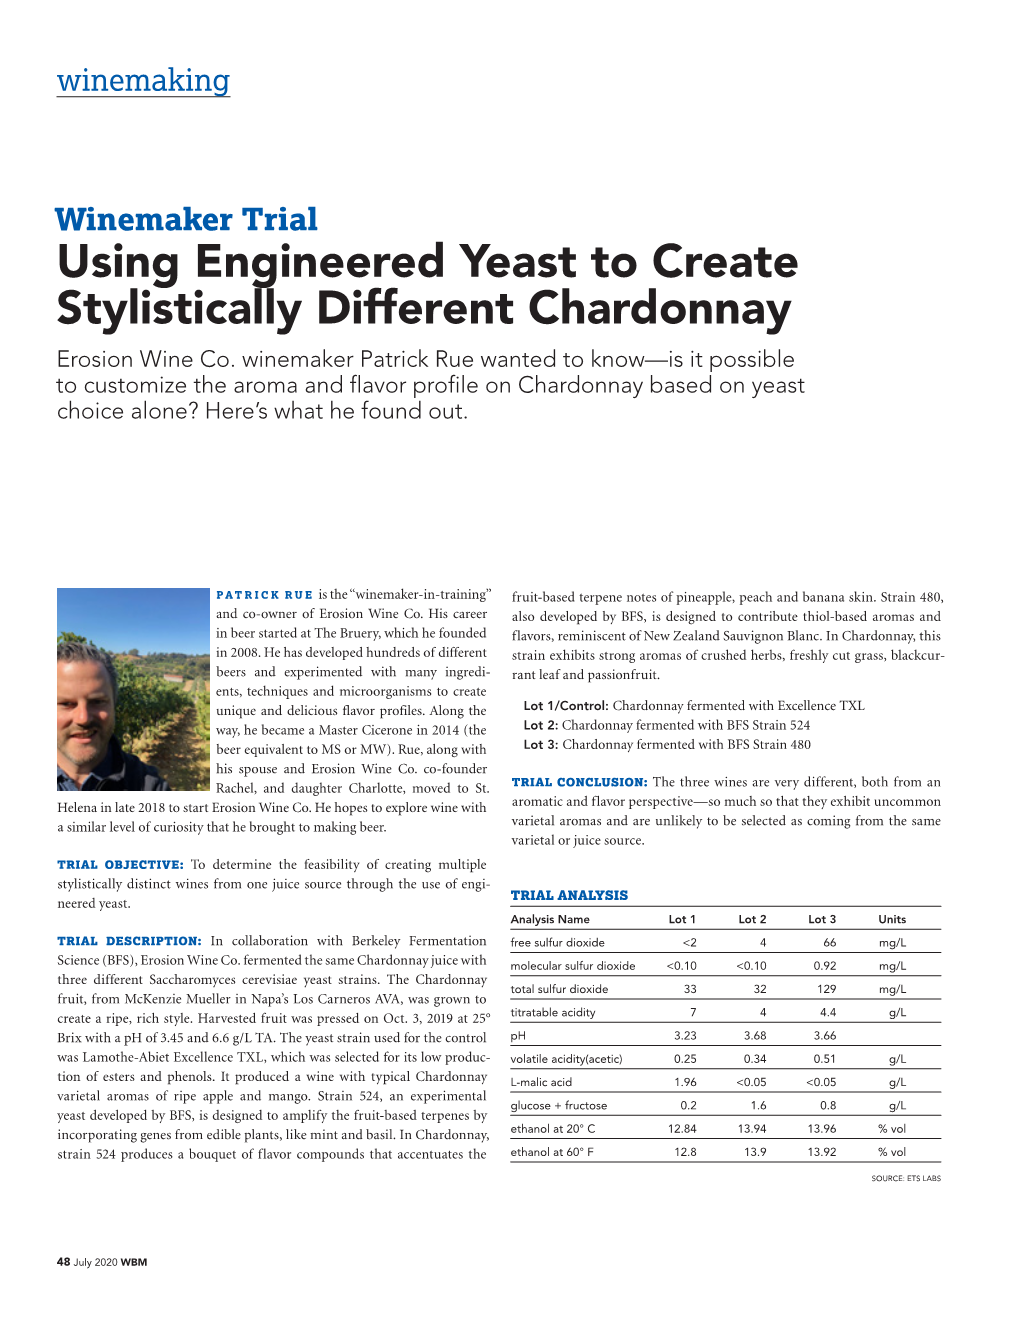 Winemaker Trial: Using Engineered Yeast to Create Stylistically Different Chardonnay